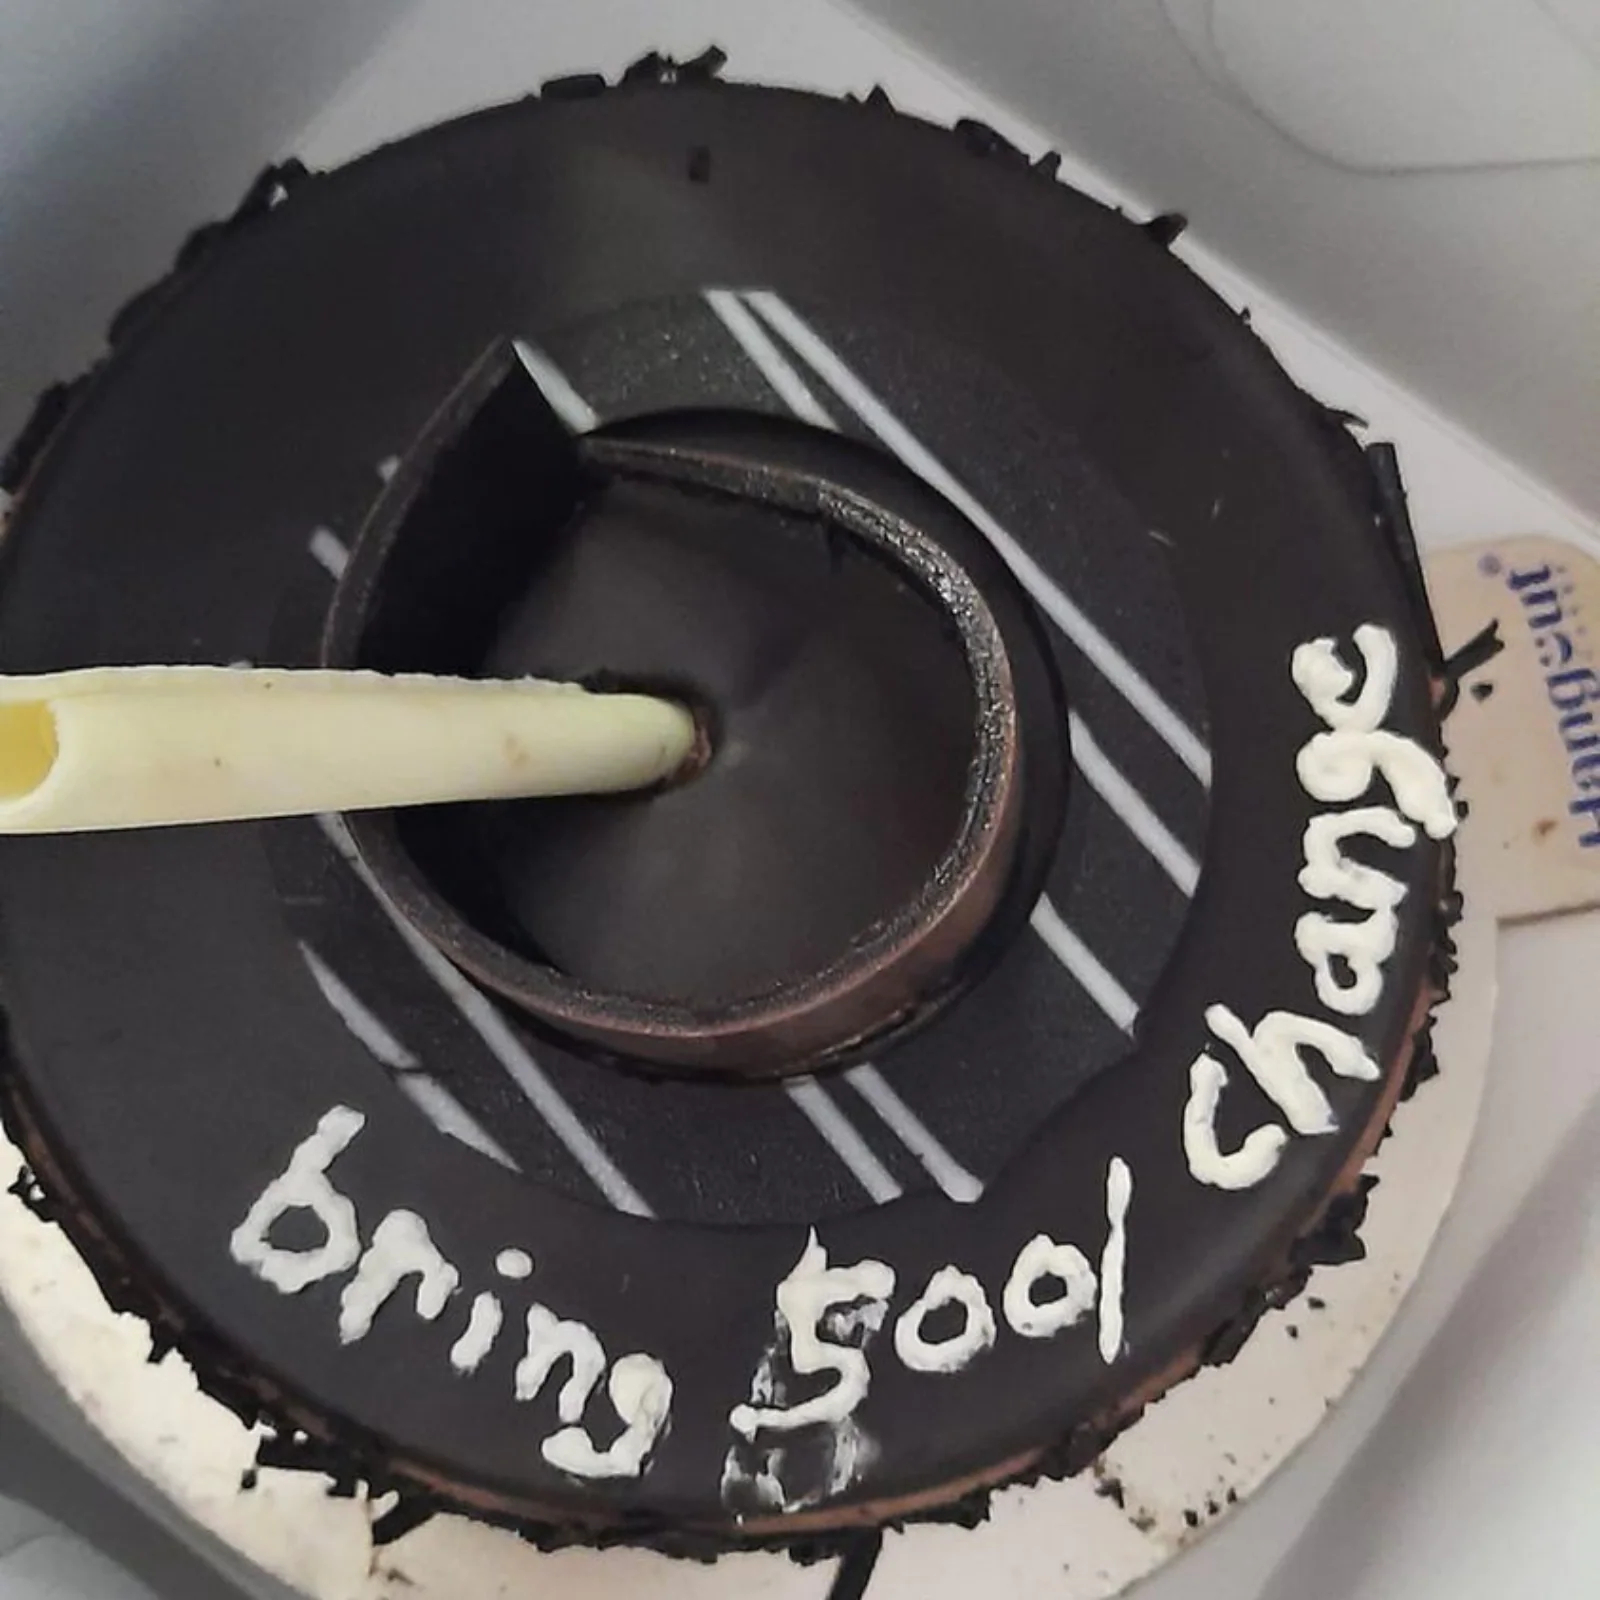 Woman placed order for a cake with change instruction netizens react